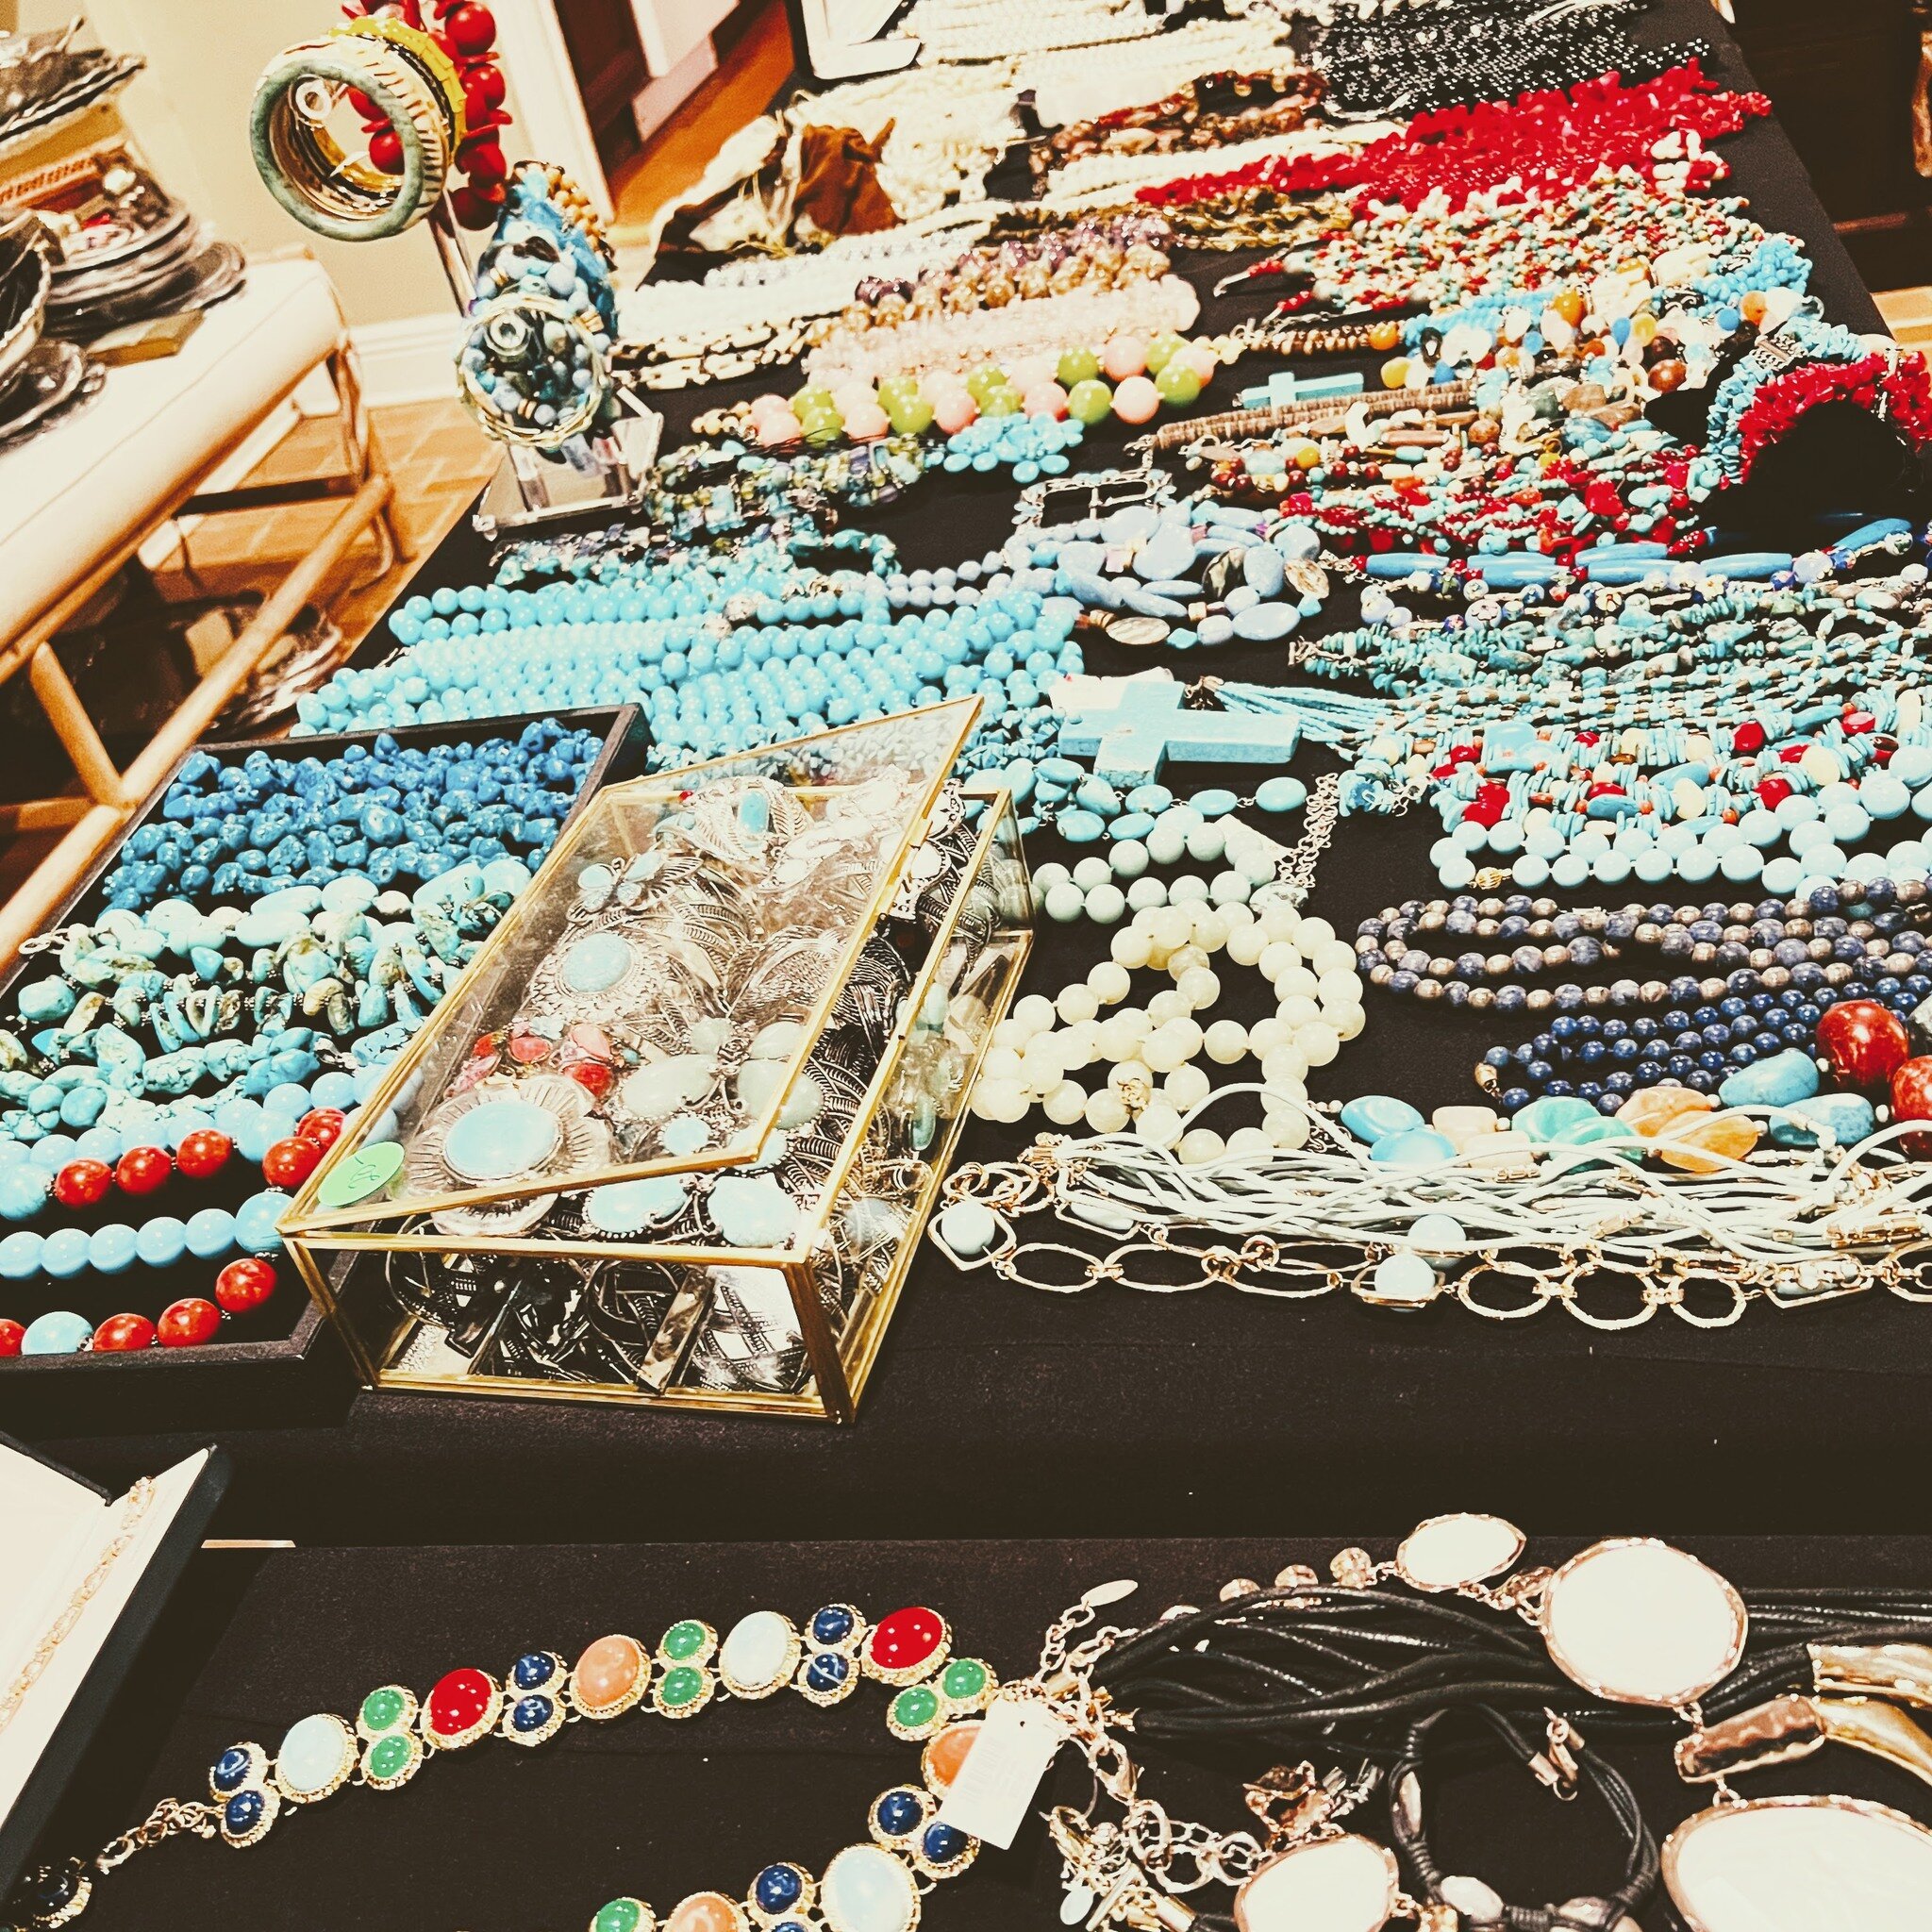 This weekend&rsquo;s #CoralGables #EstateSale features a huge assortment of jewelry, as well as purses and shoes from brands like Lauren. Swing by and see us. Photos &amp; details at: http://go.1or.ch